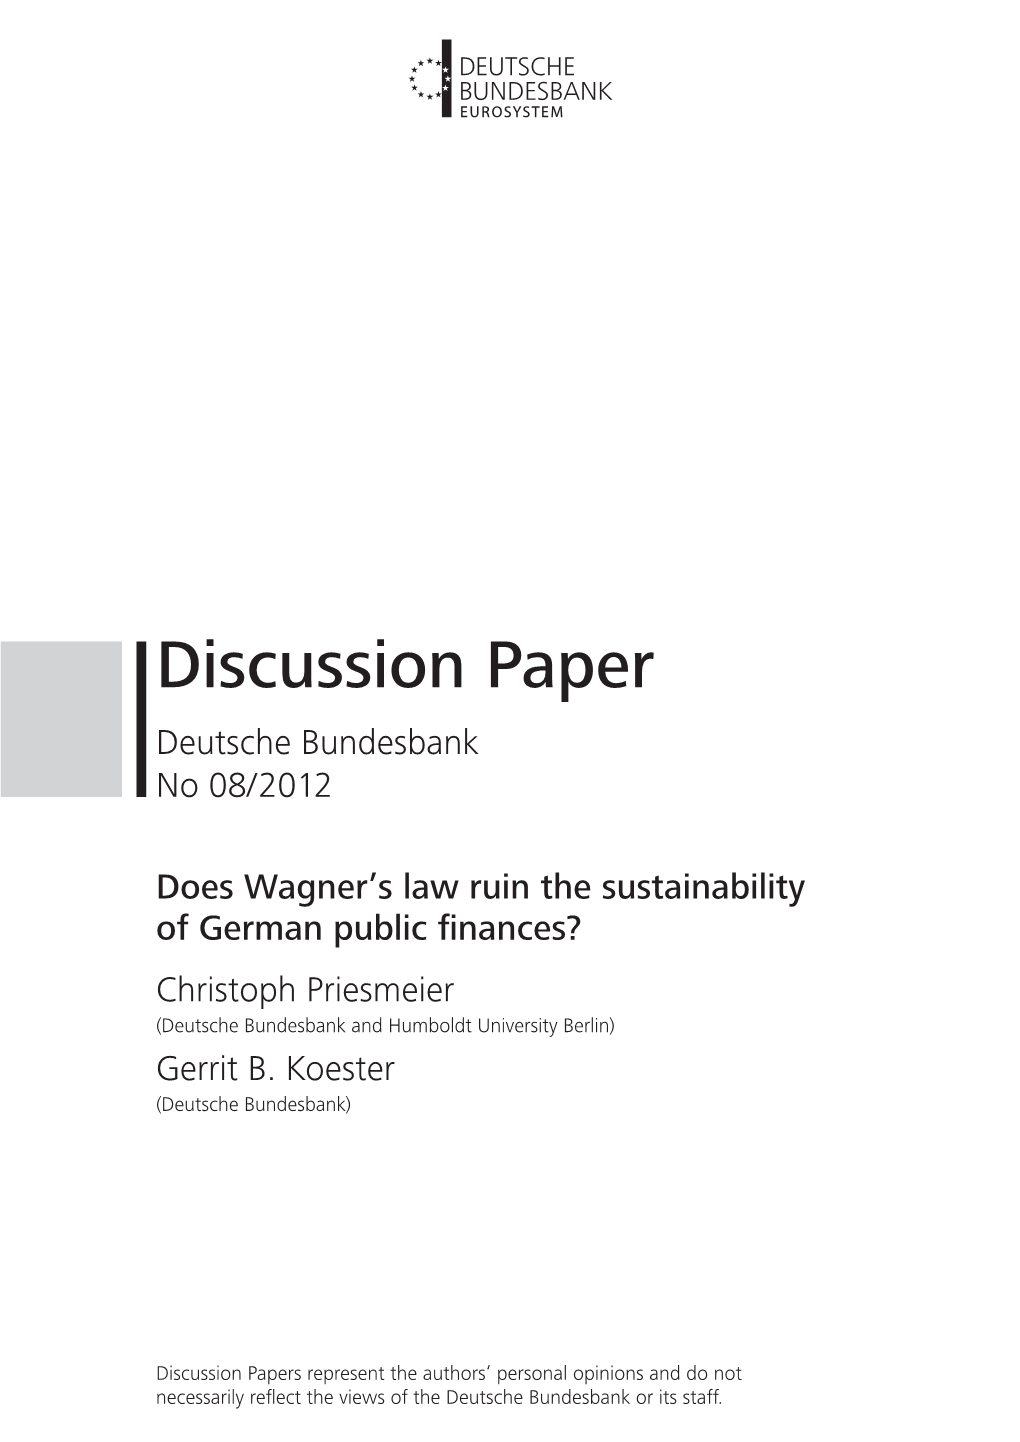 Does Wagner's Law Ruin the Sustainability of German